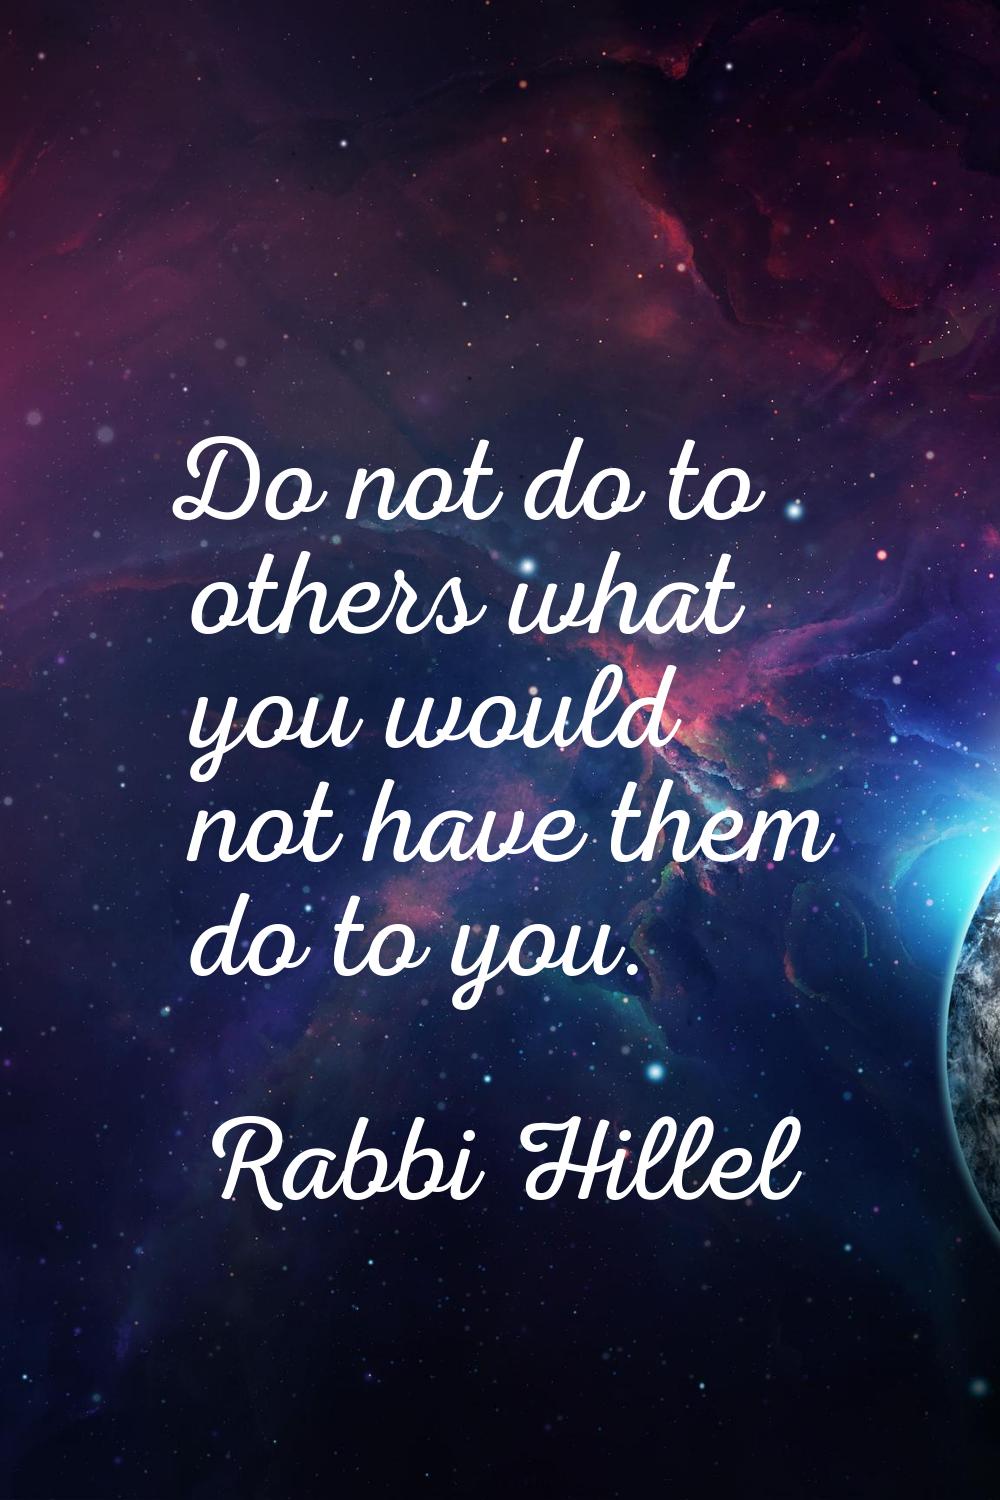 Do not do to others what you would not have them do to you.